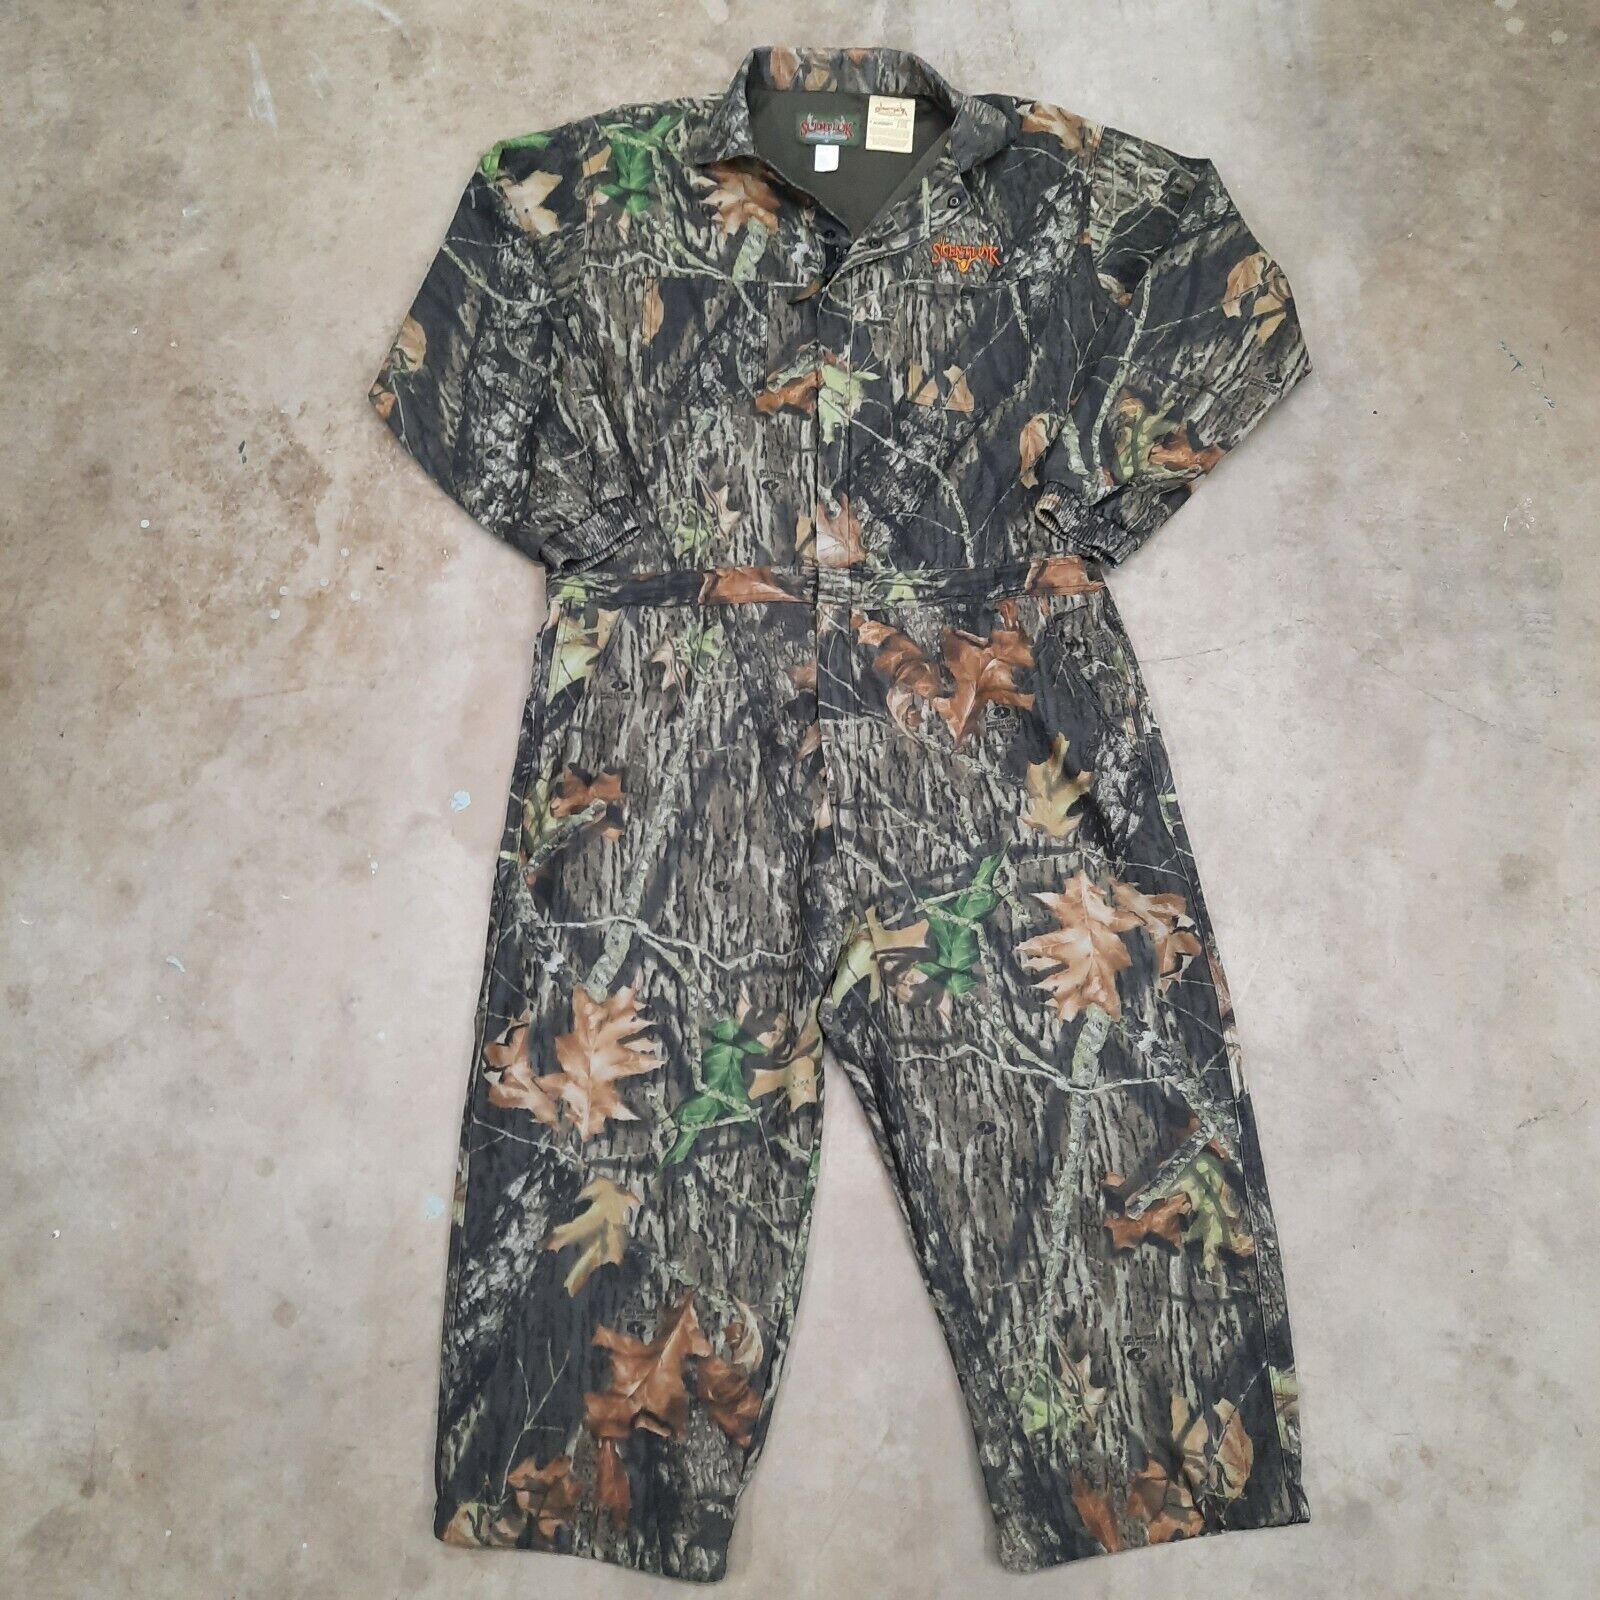 Scent-Lok Mossy Oak Break Up Camo Coveralls Hunting Suit 1 Pc Size 2X GUC!!!